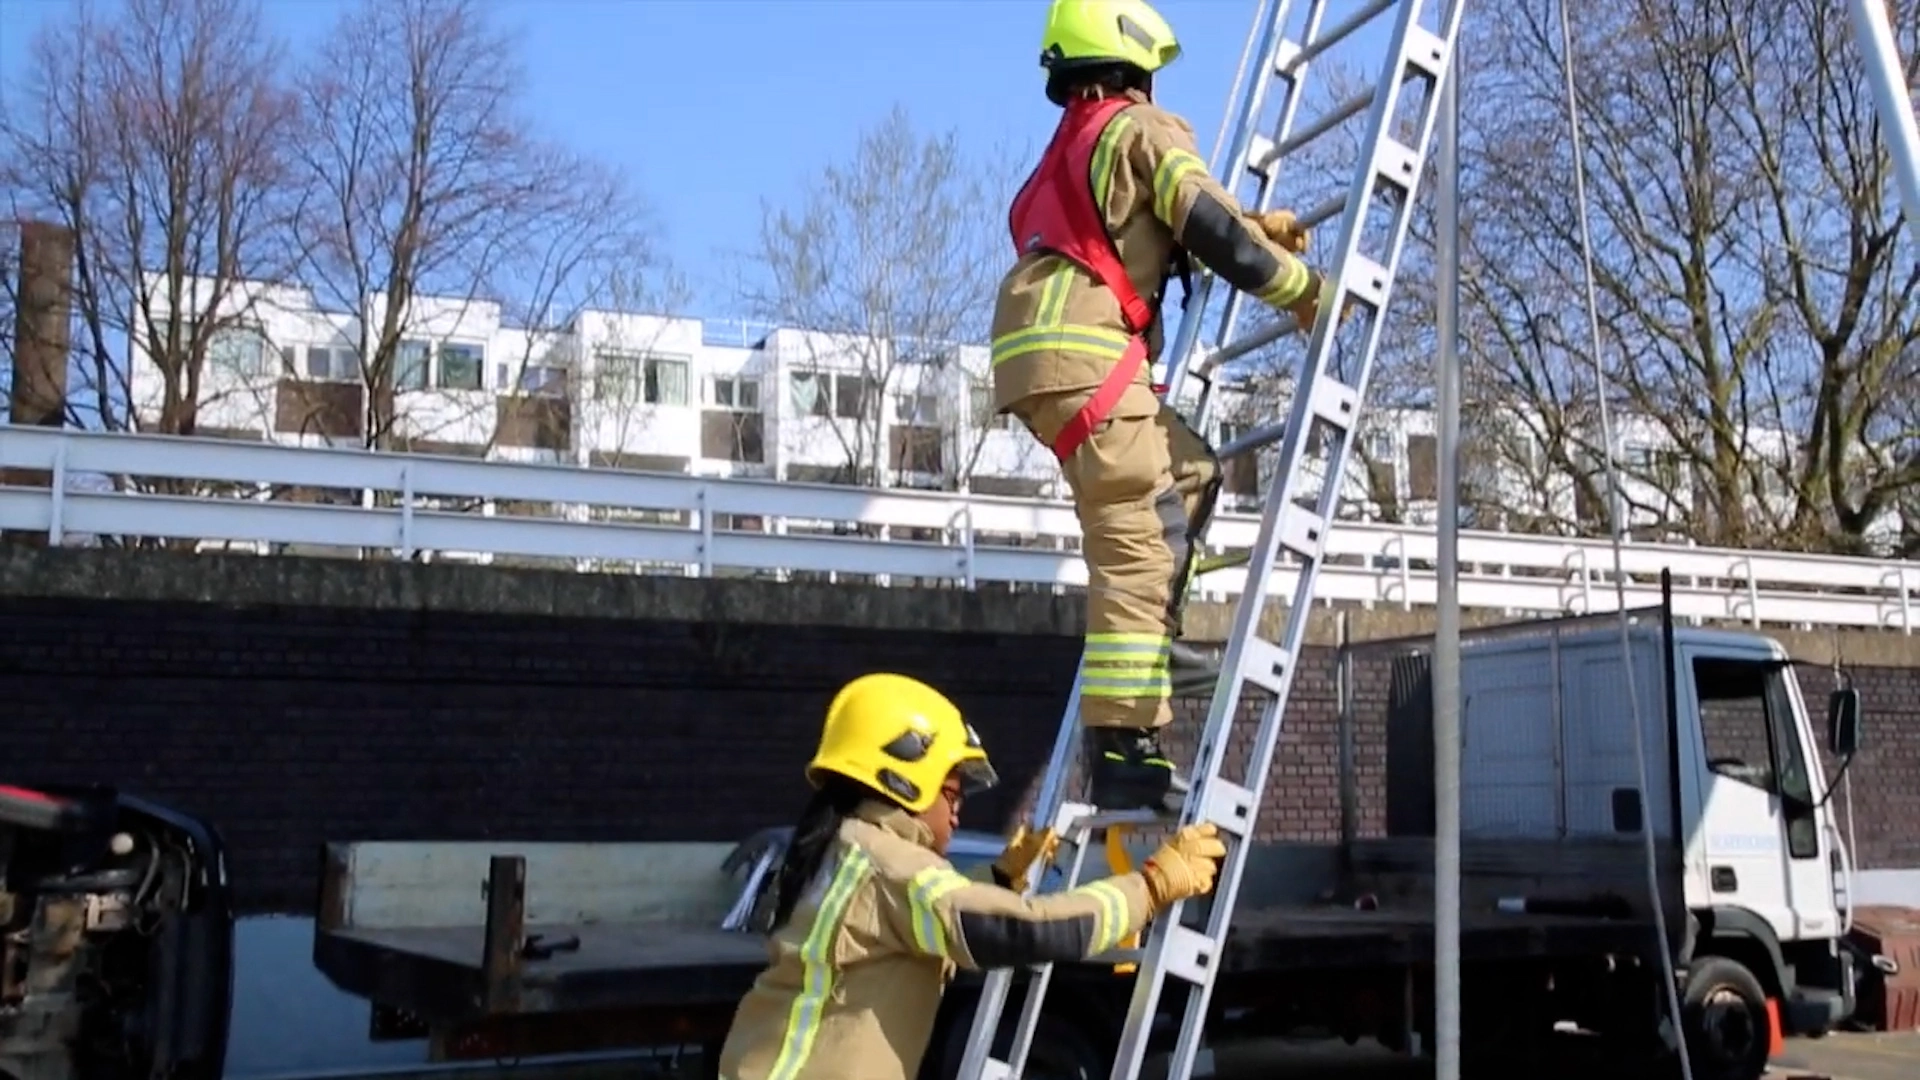 A firefighter is climbing a ladder as part of a Job Function Test to determine if they are able to perform the physical requirements of the job.